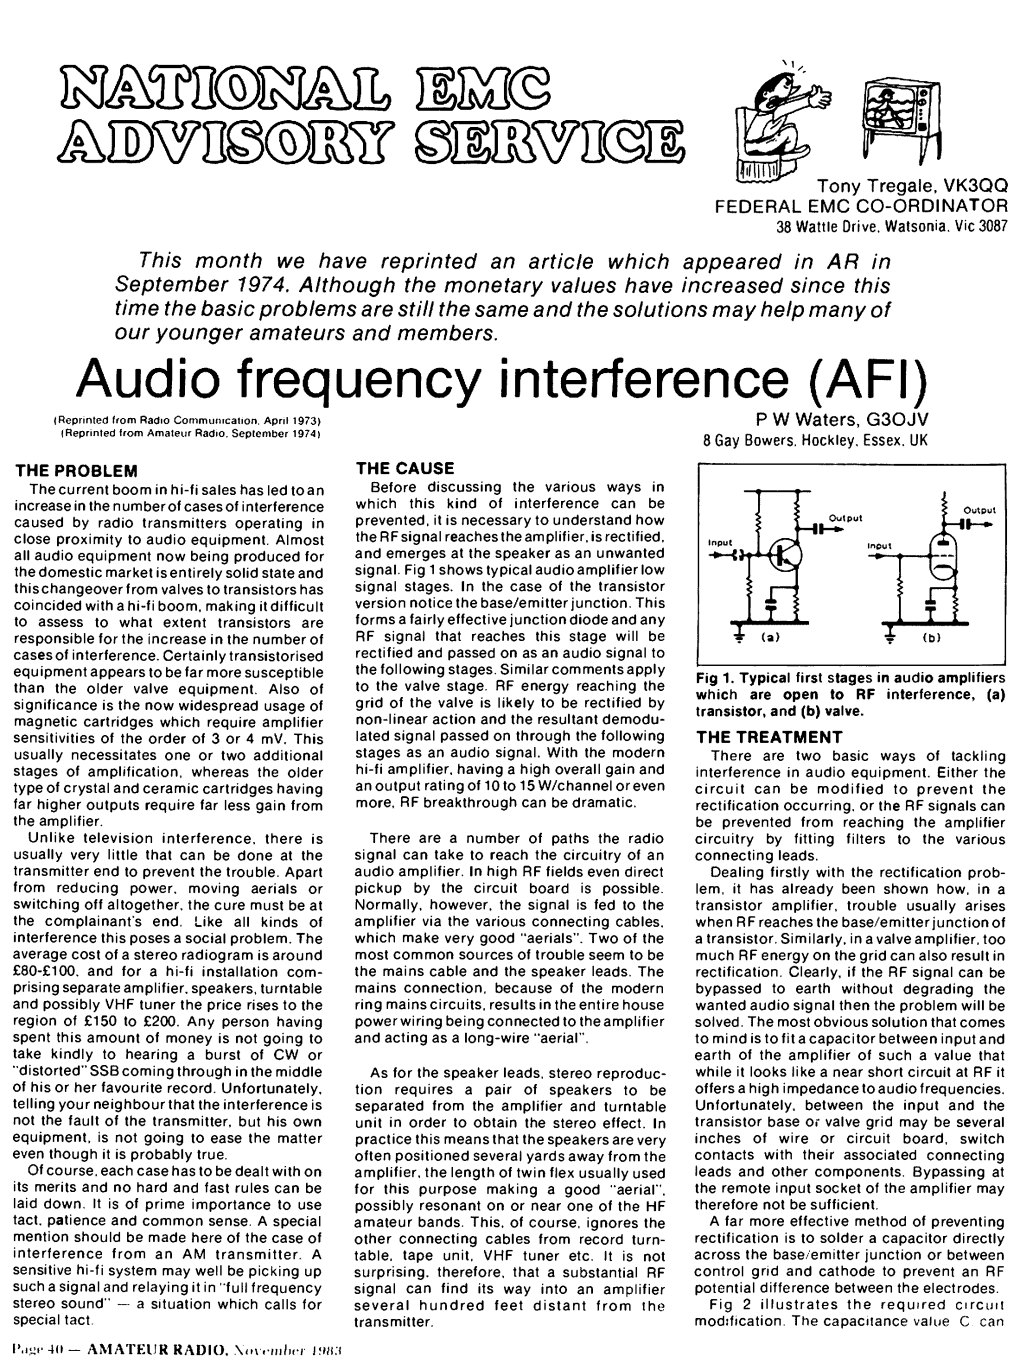 Audio Frequency Interference (AFI) {Reprinted from Radio Communication